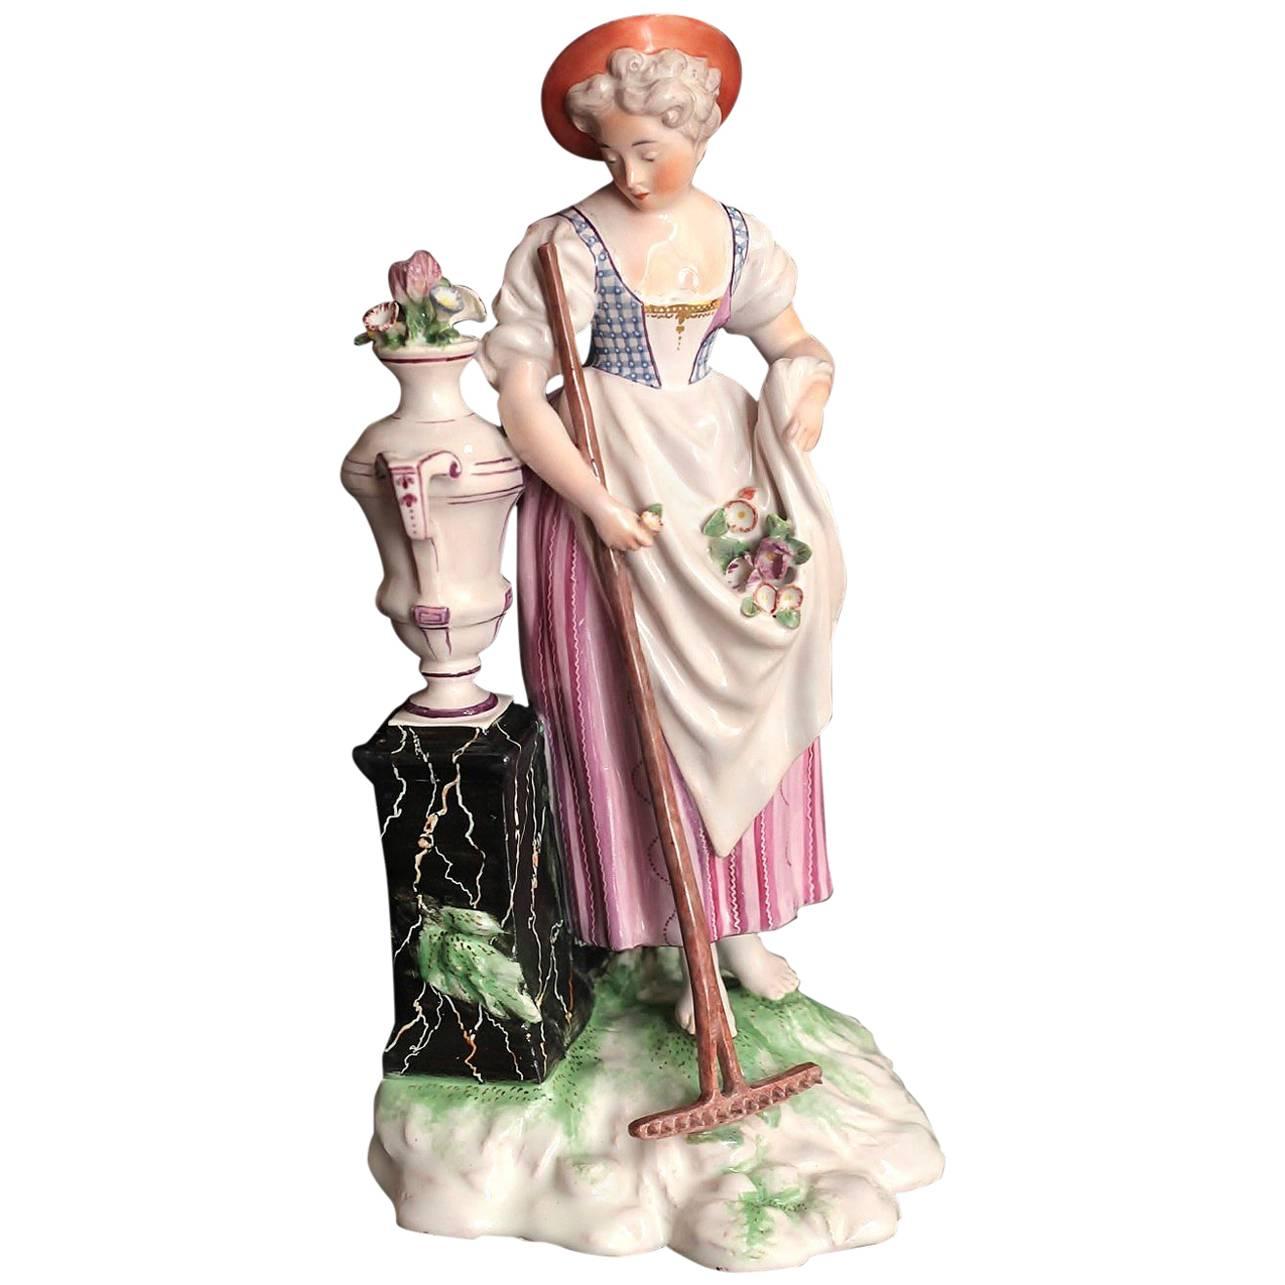 Figure of Niderviller Faience 'France' Representing a Young Woman, 18th Century